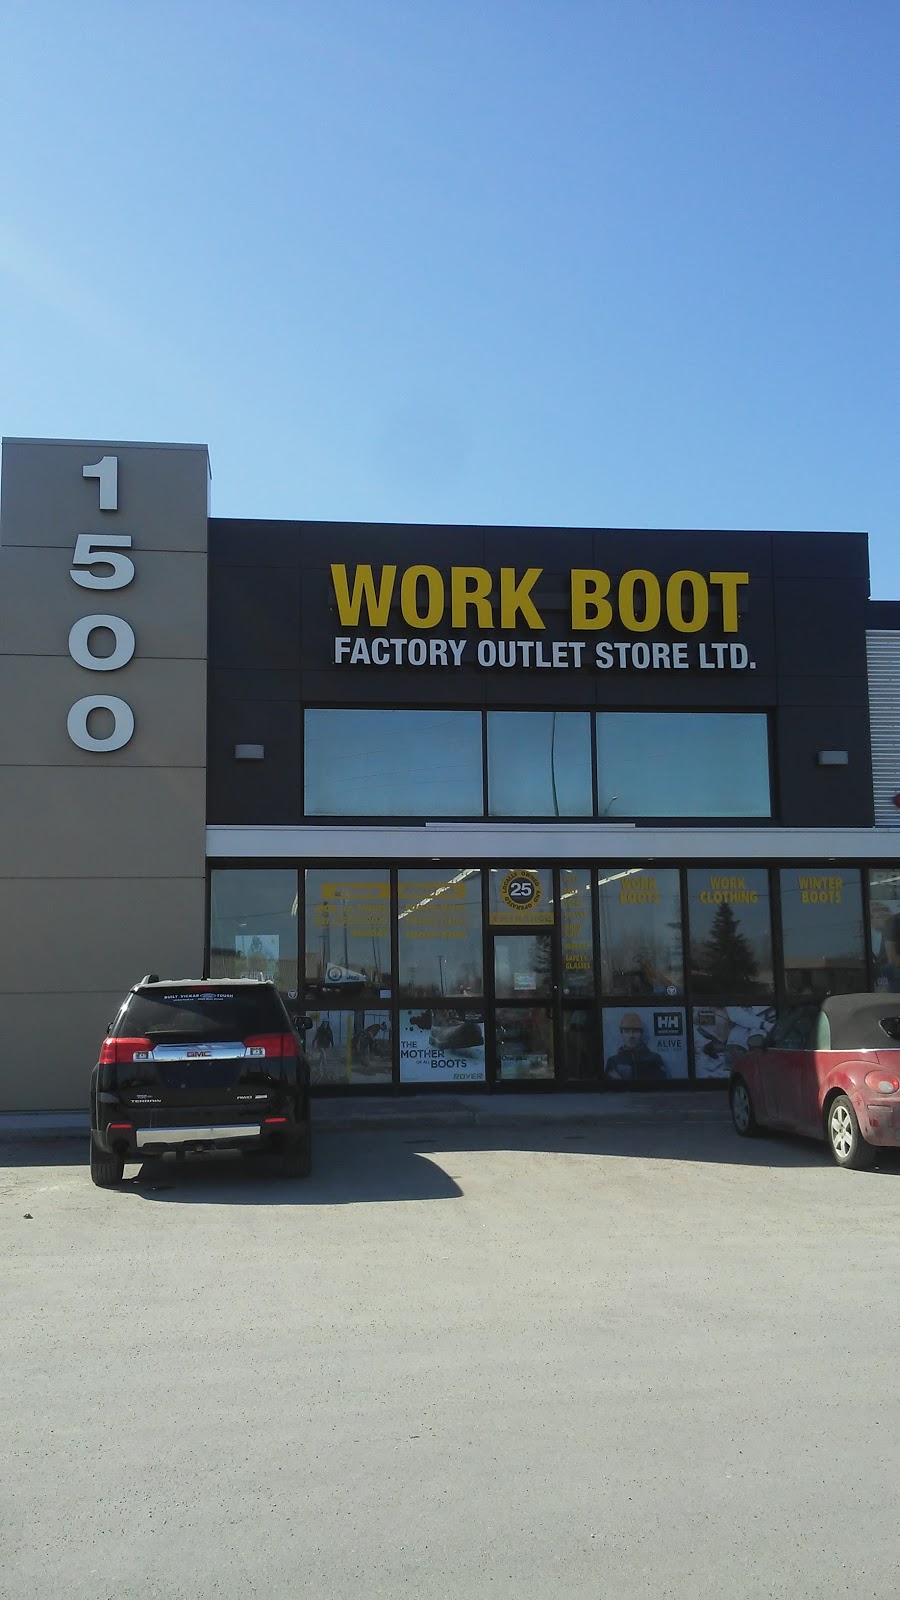 Work Boot Factory Outlet Store Ltd | shoe store | 1500 Regent Ave W #20, Winnipeg, MB R2C 3A8, Canada | 2046630000 OR +1 204-663-0000